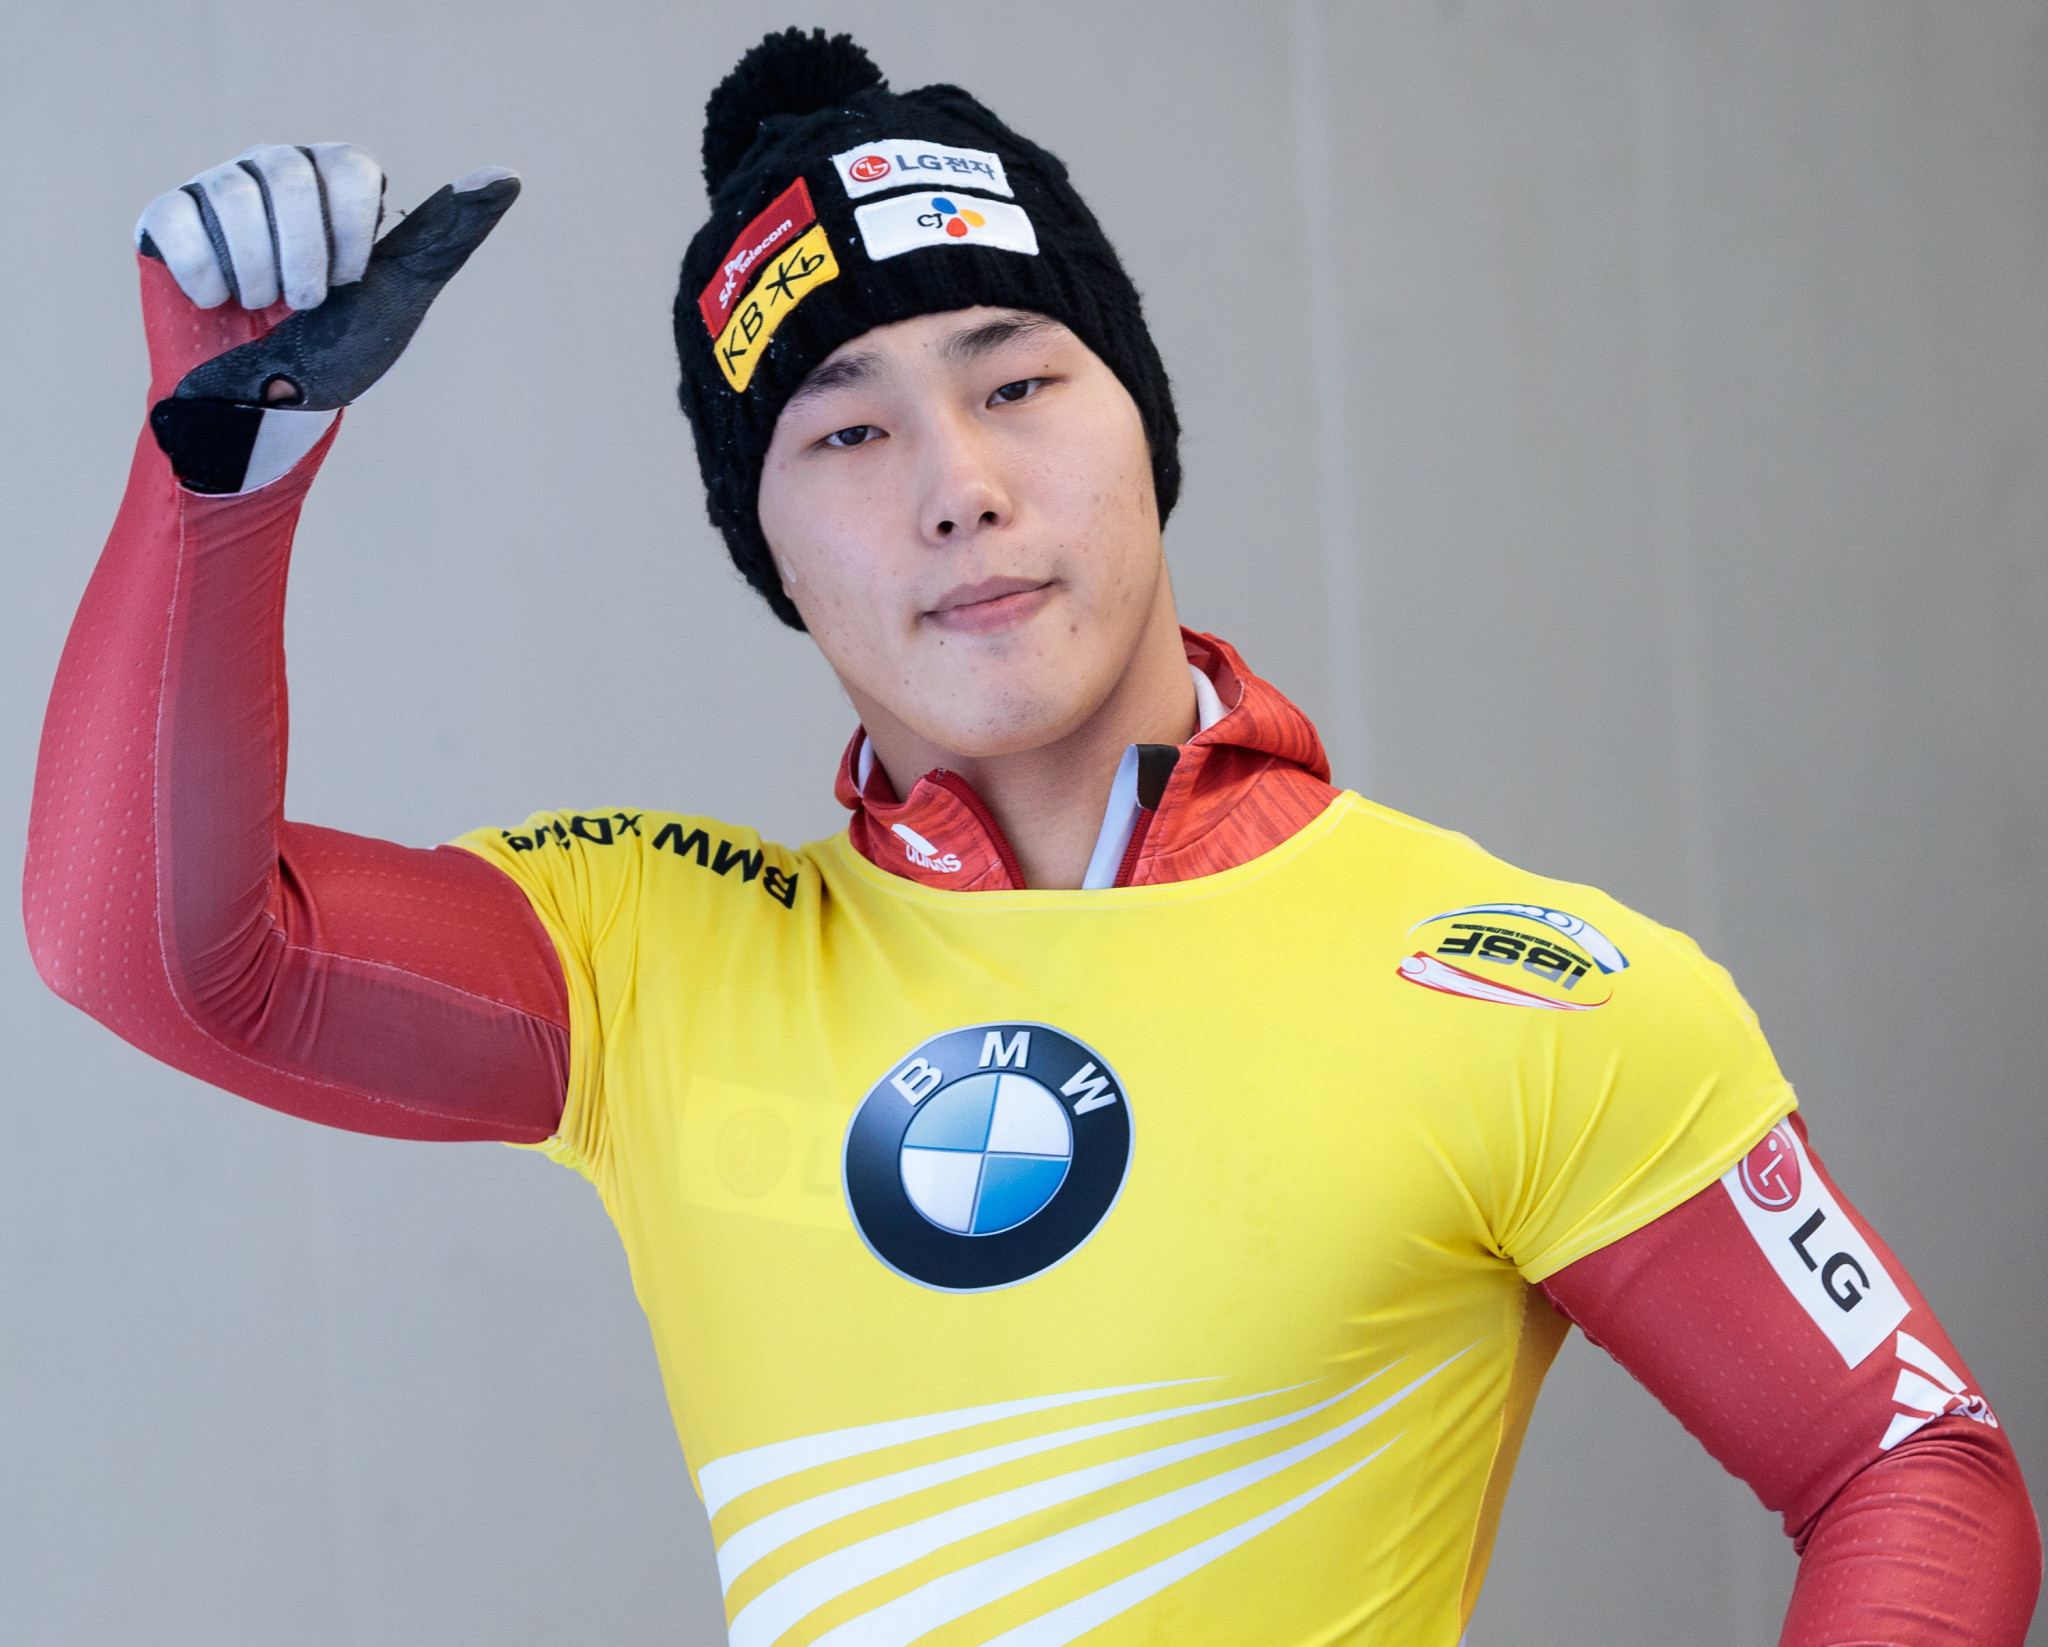 South Korea's Sungbin Yun is missing the World Cup finale to prepare for Pyeongchang 2018 ©Getty Images